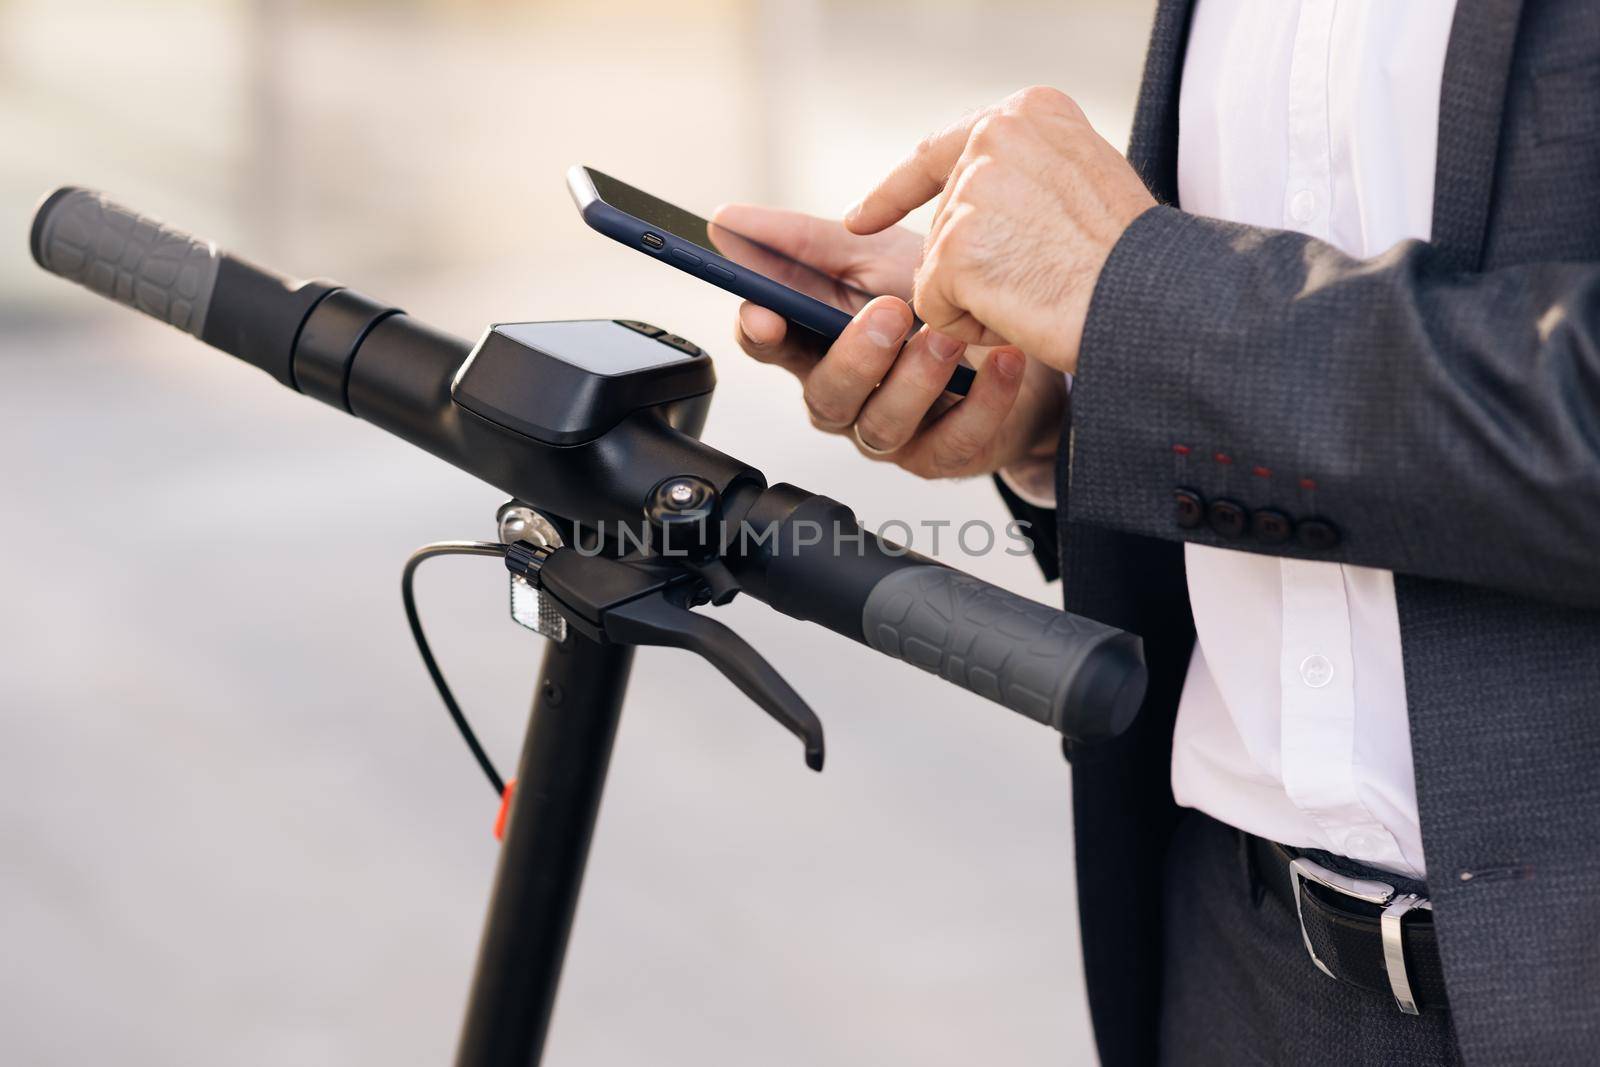 Unrecognizable man using smartphone app. Businessman approaches an electric scooter and using mobile phone app NFC contactless locker on bike bicycle in sharing parking lot. Ecological transportation by uflypro